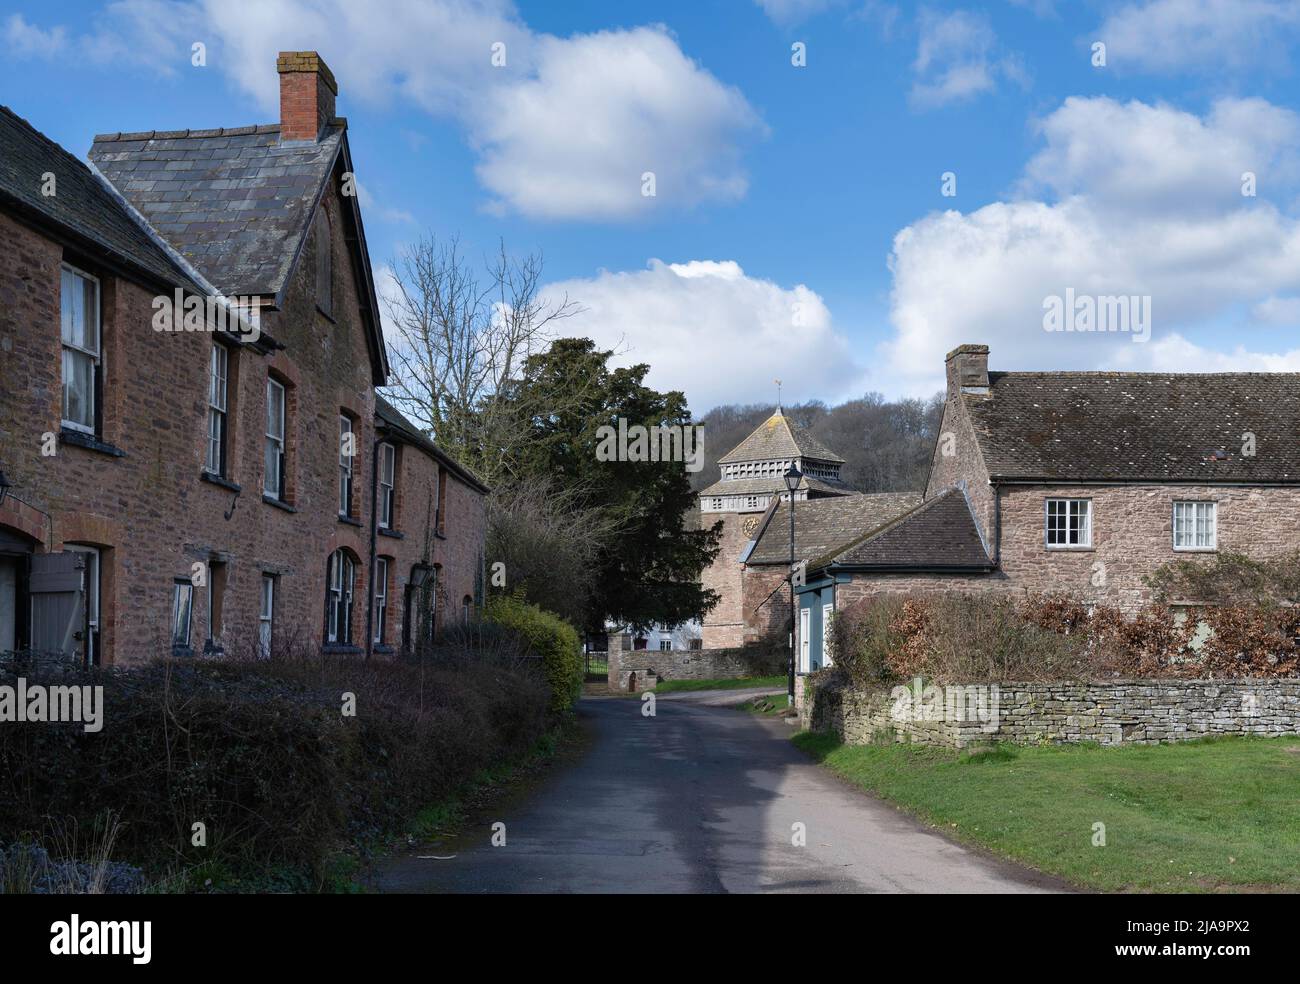 Skenfrith village, Monmouthshire, Wales, UK. Stock Photo